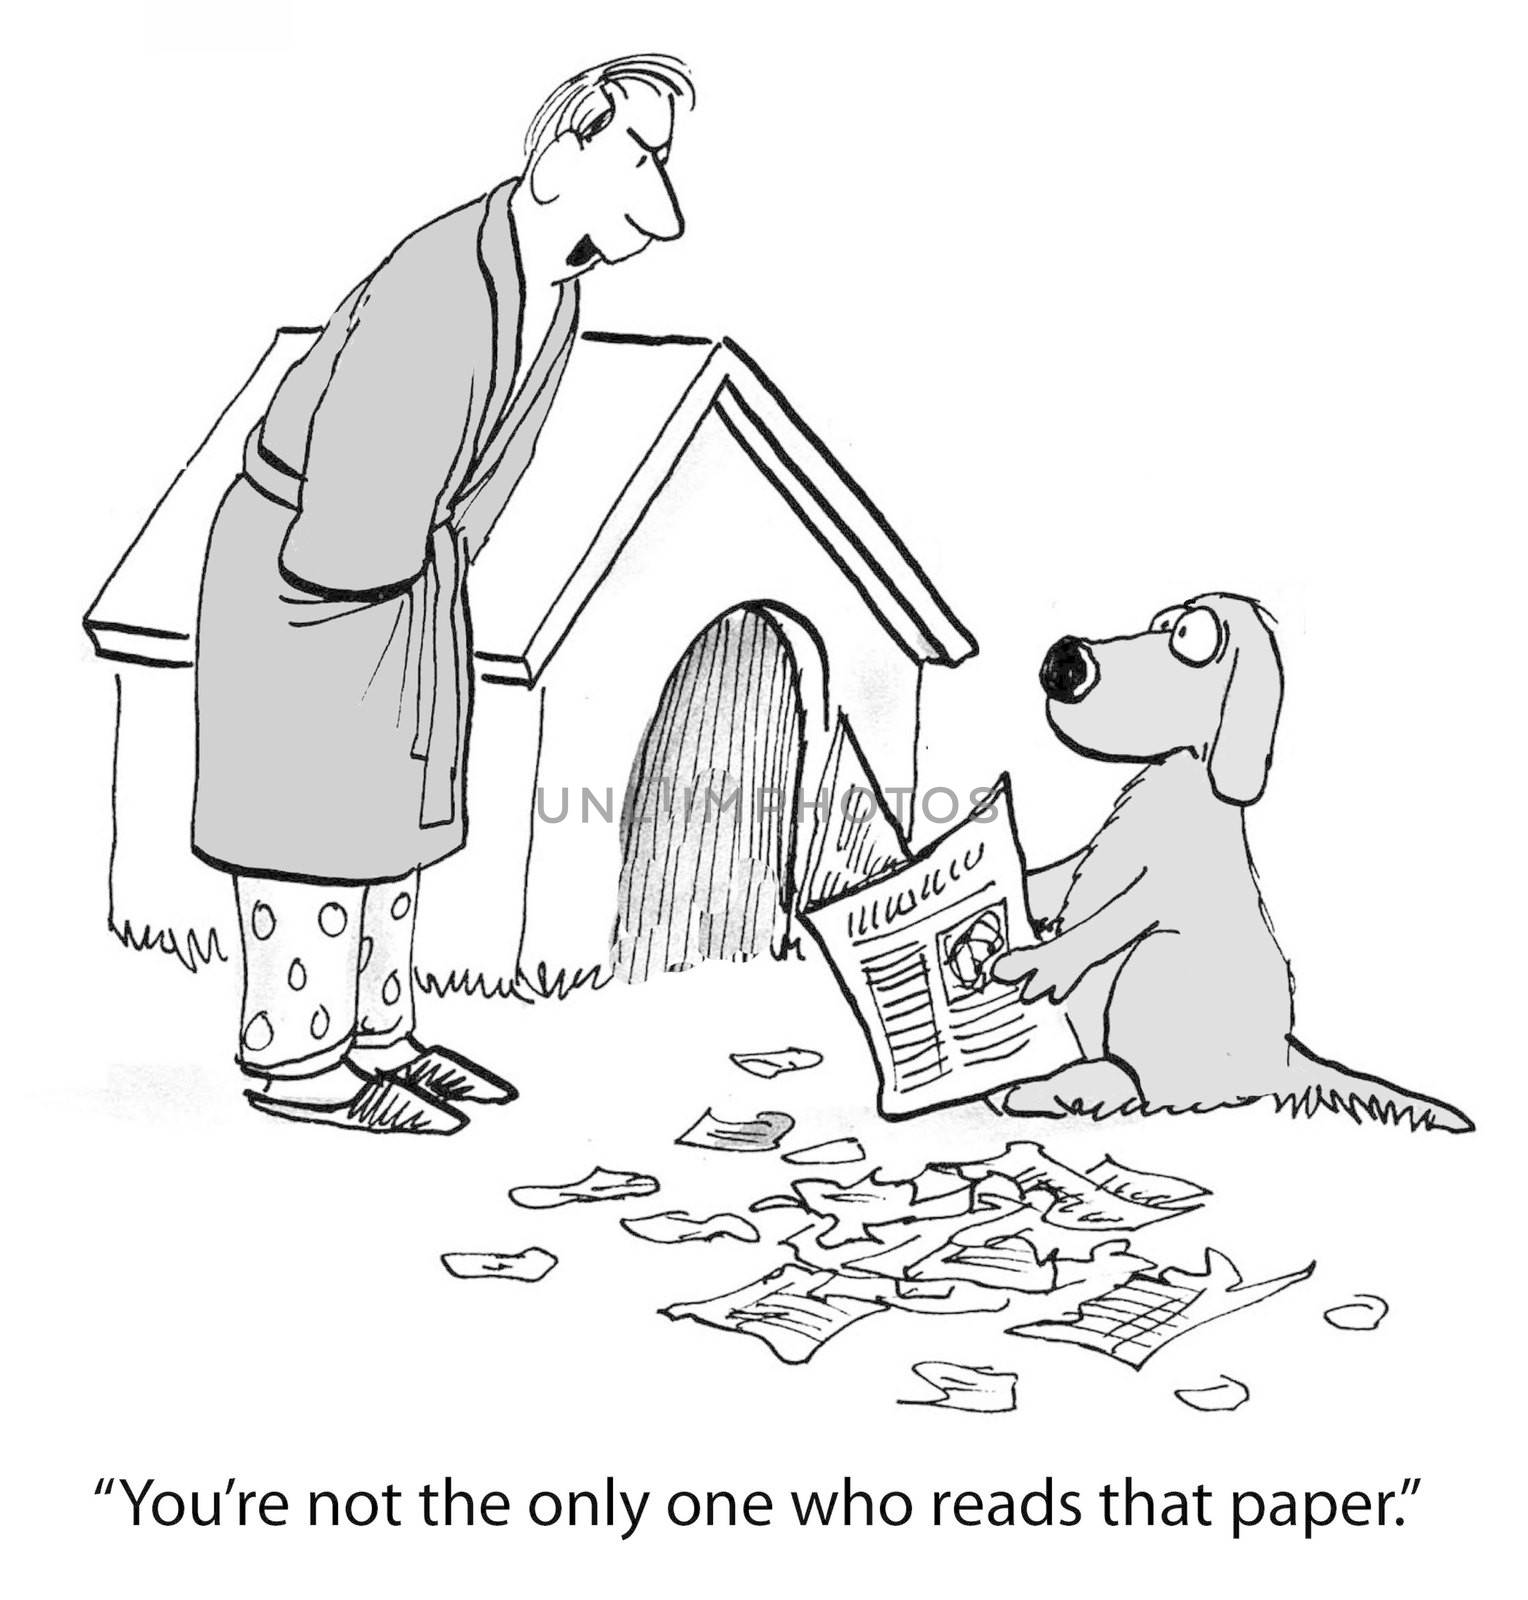 "You're not the only one who reads that paper."